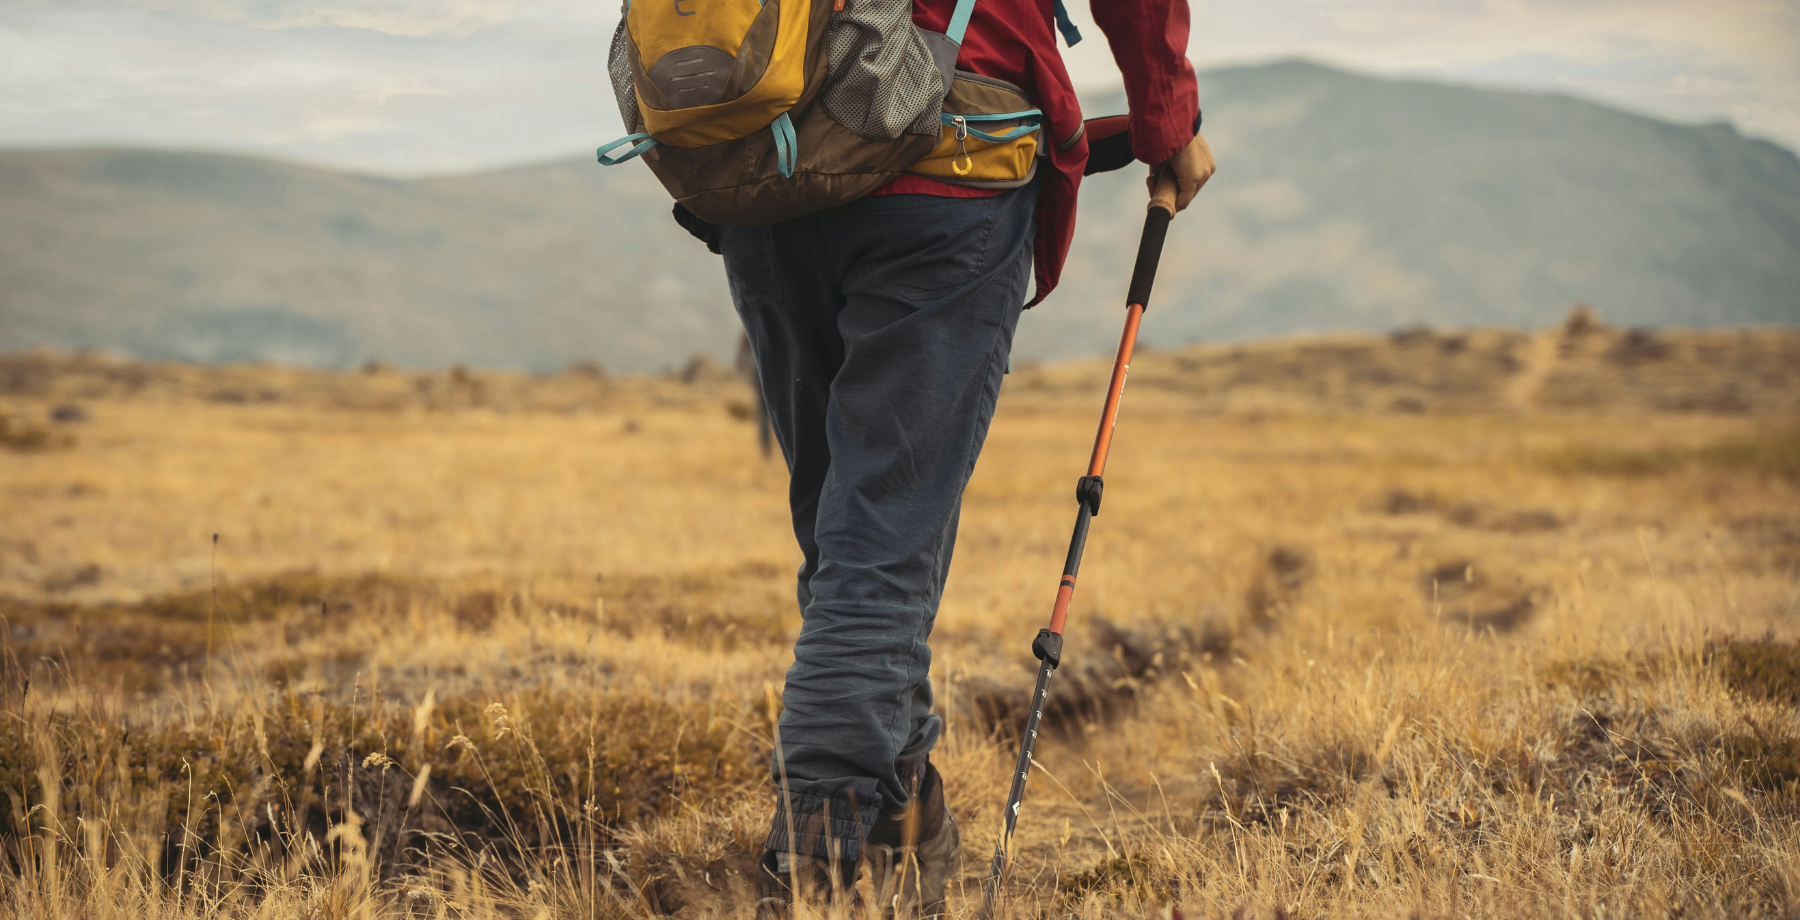 Travel hiking tip: use a trekking pole